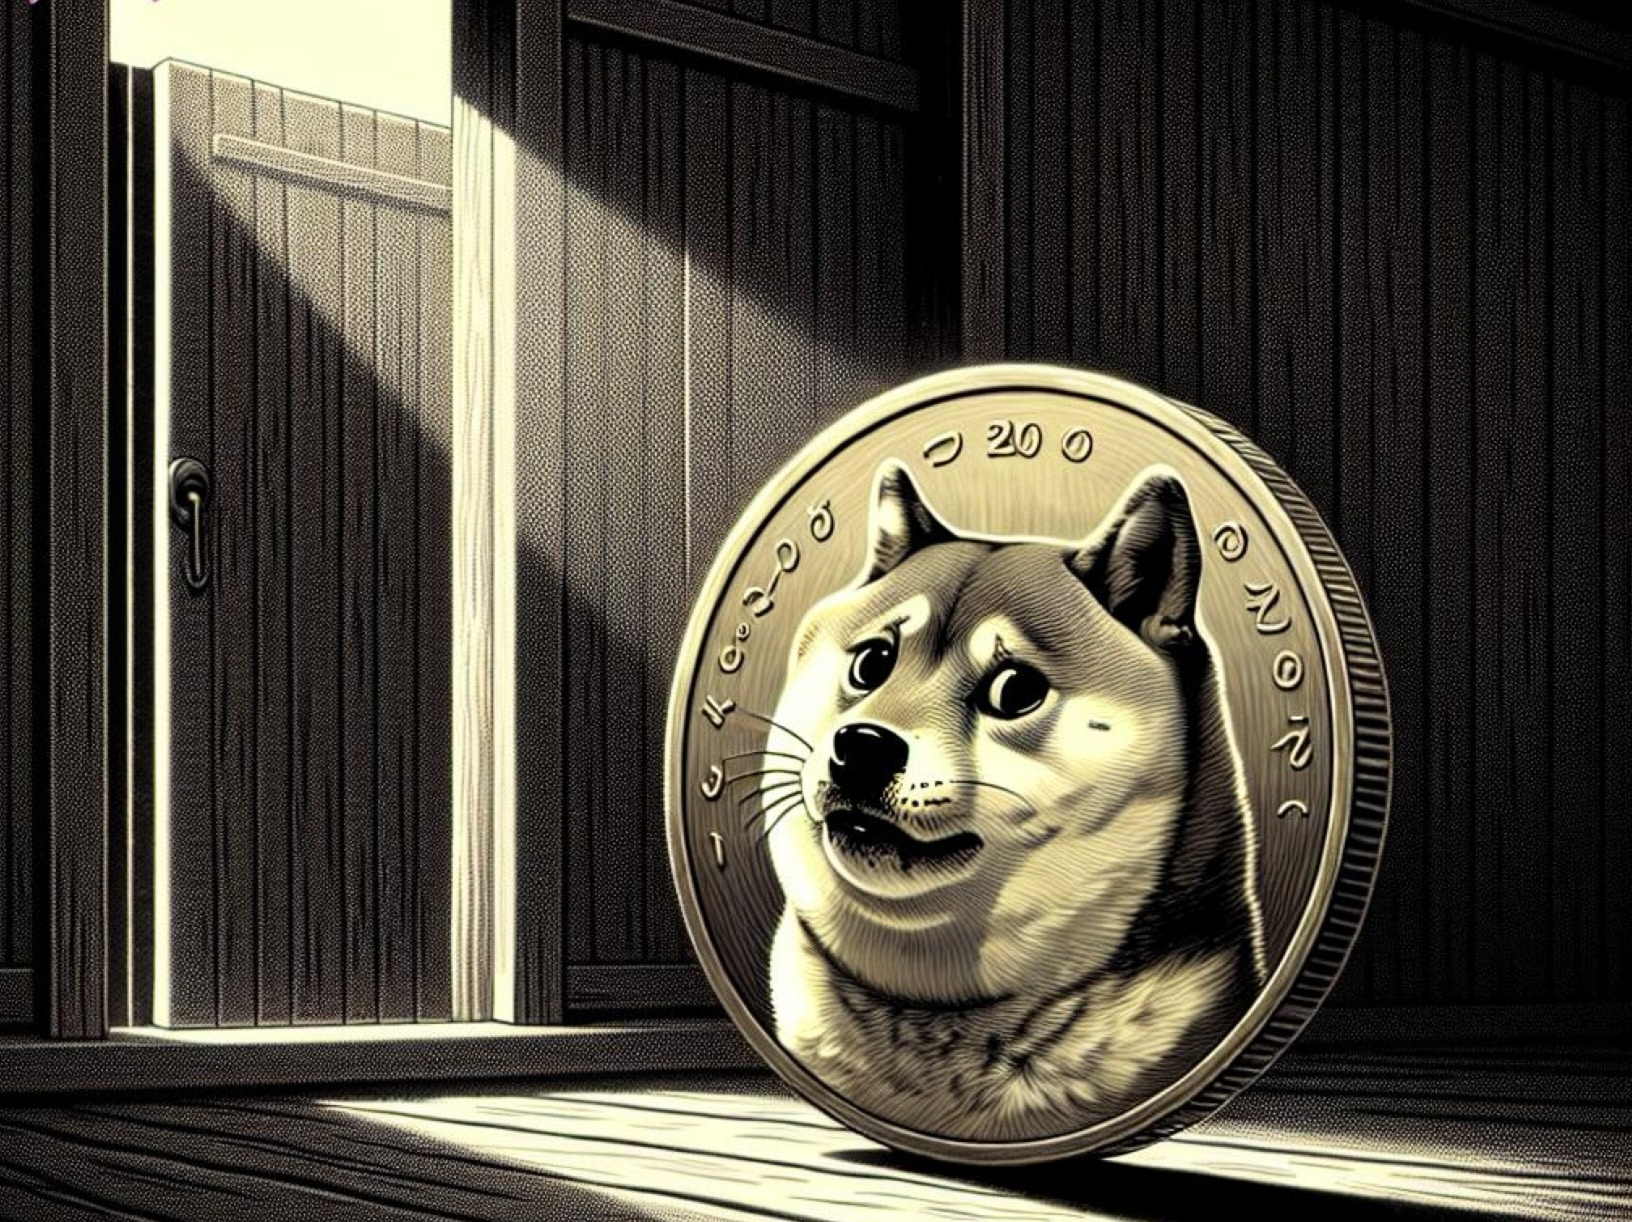 Doge holders will be hoping that it will be a future addition to Elon Musks 'X Payments' after no mention in the latest regulatory documents.